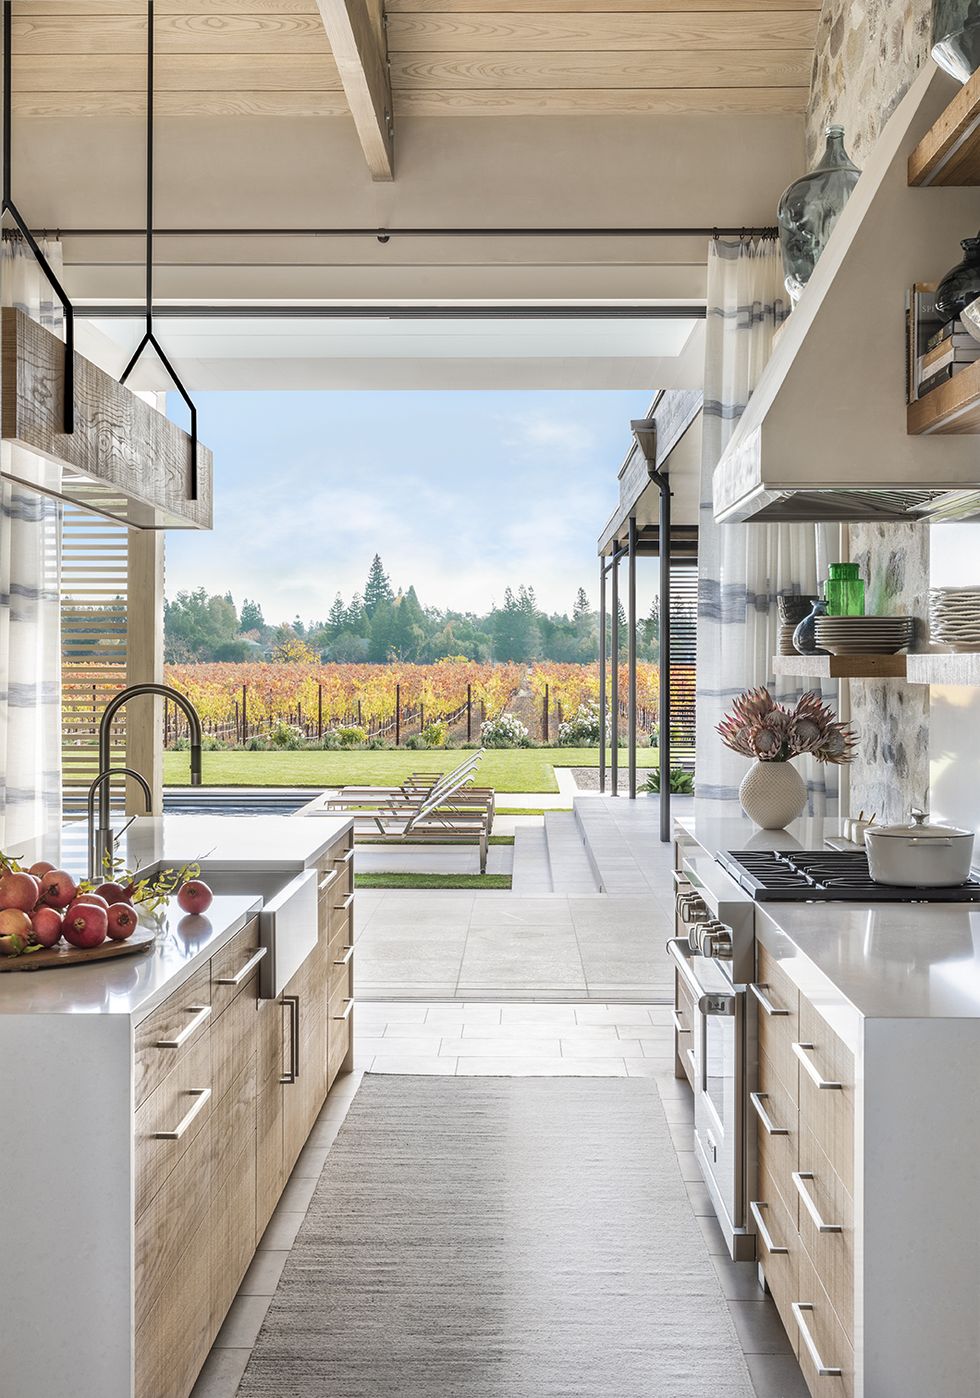 kitchen of the koman residence in napa valley, ca for marshall watson designs photographed by lisa romerein